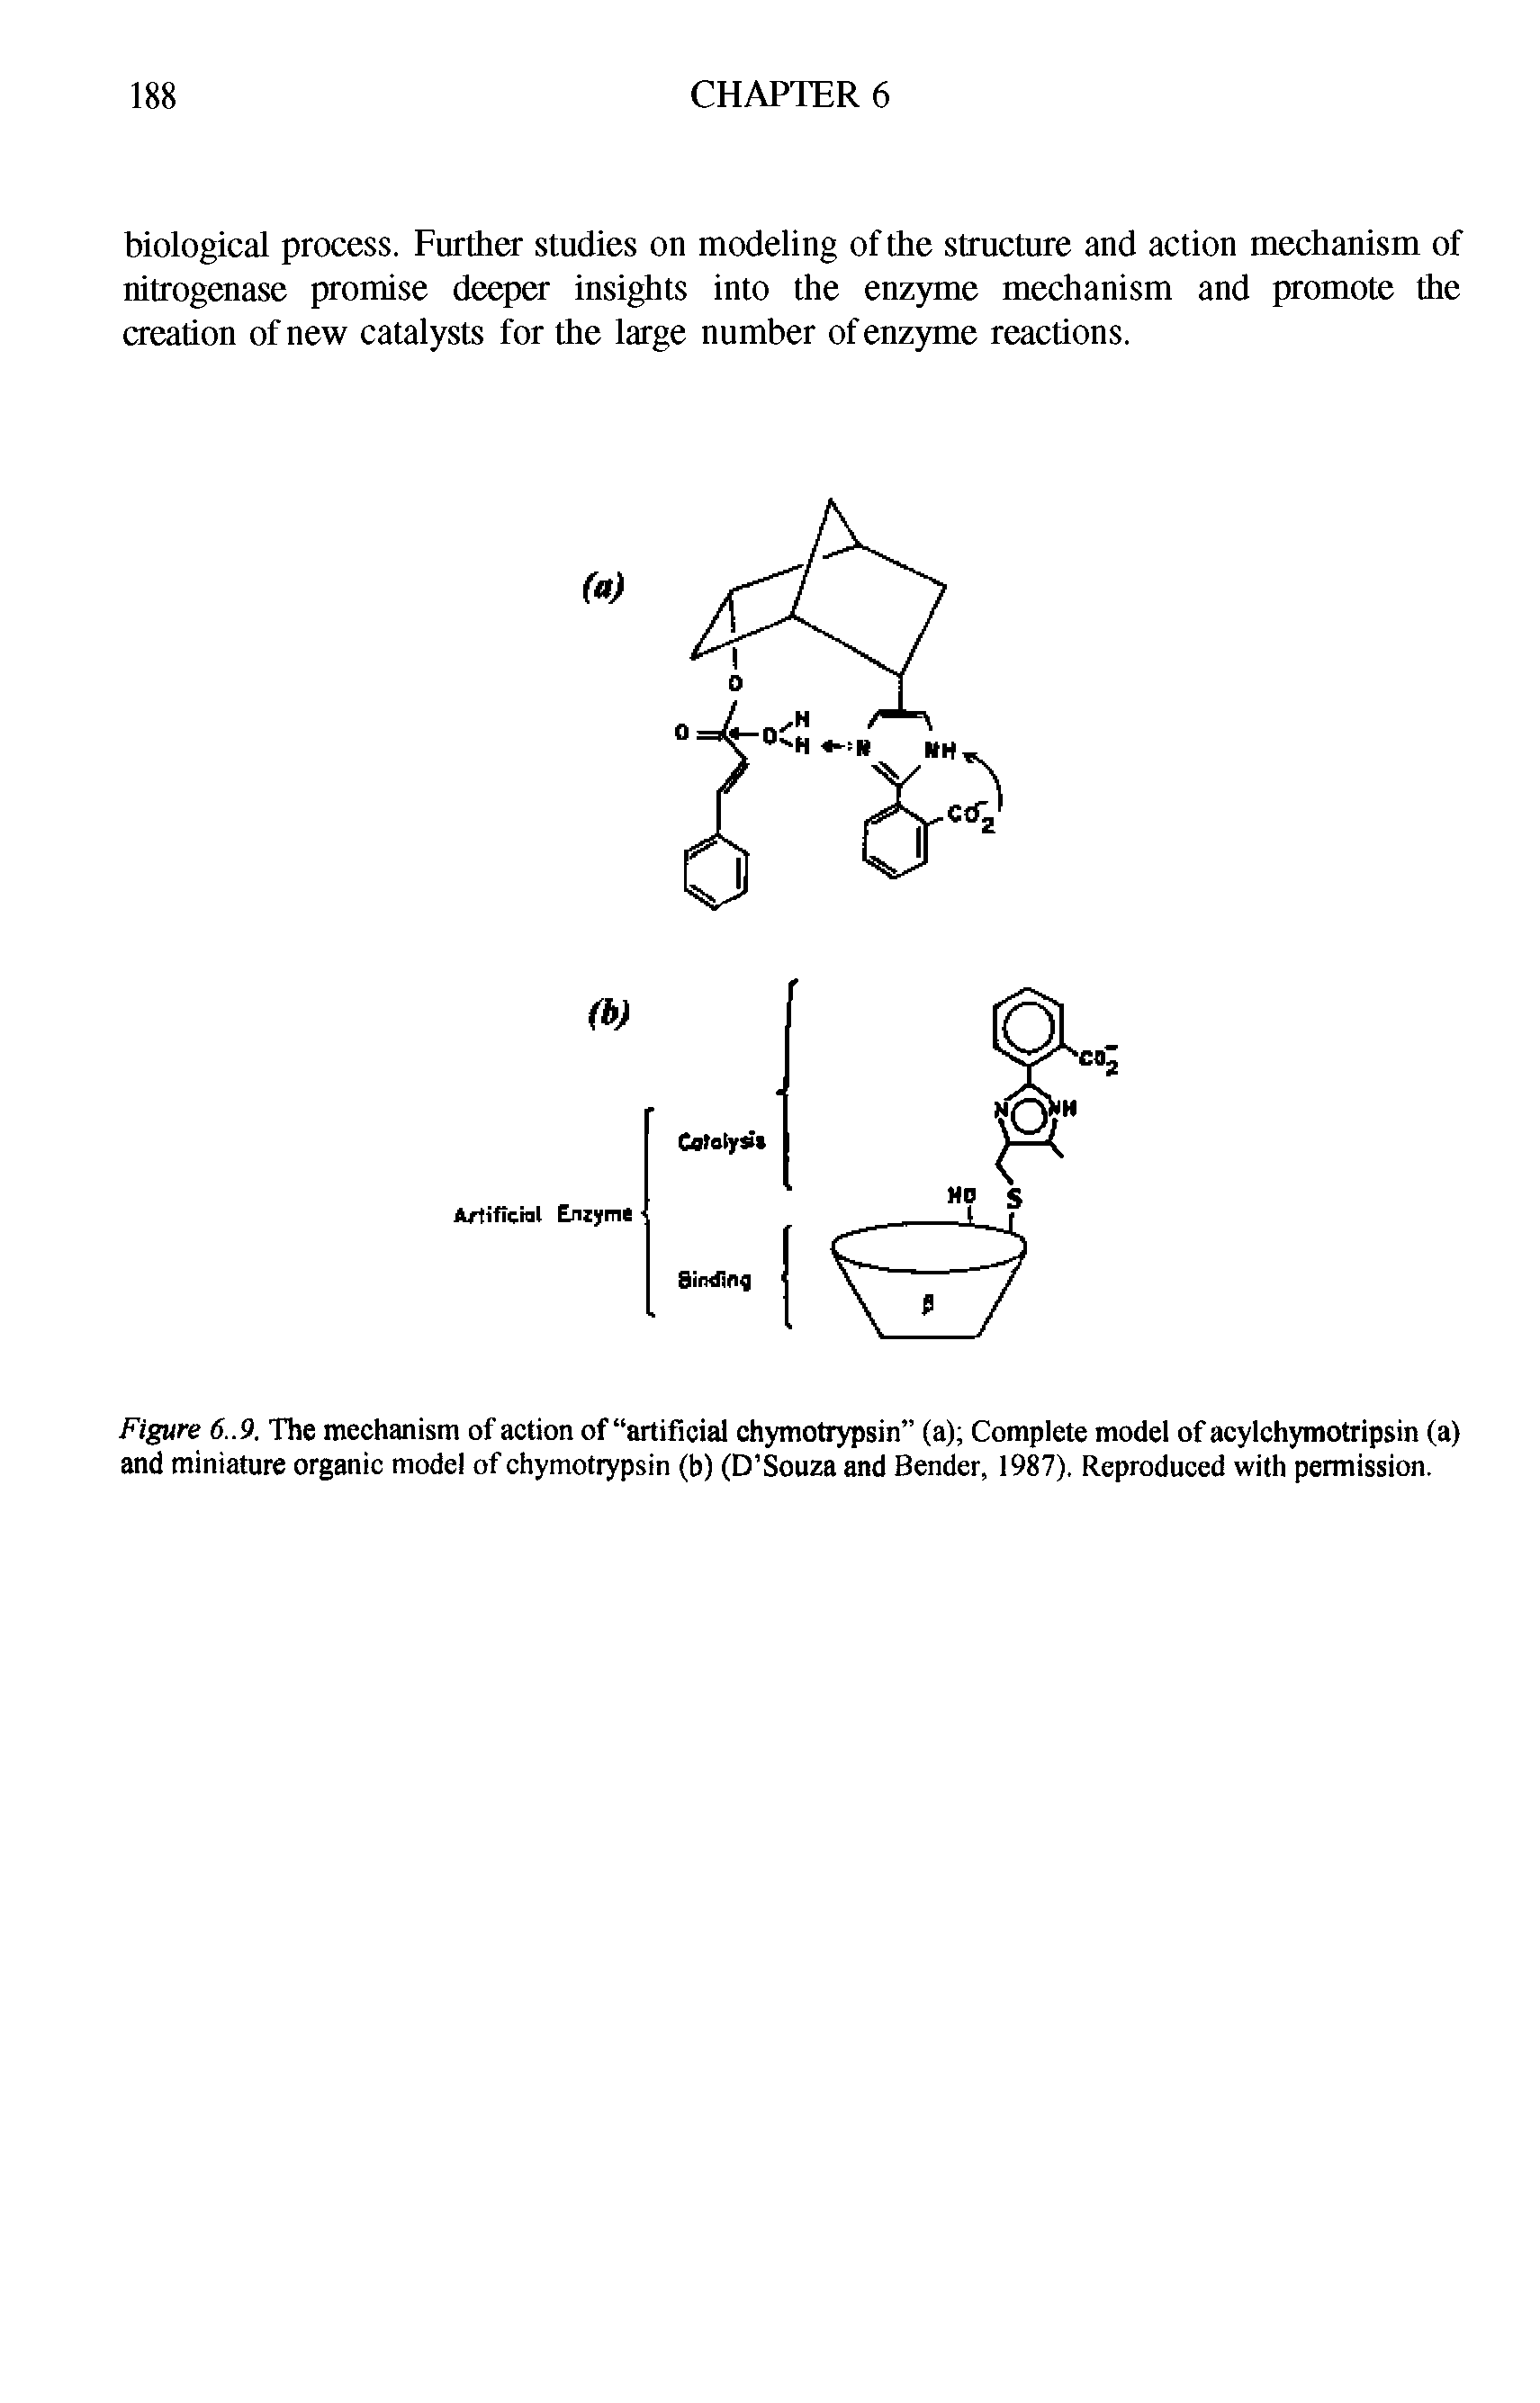 Figure 6..9. The mechanism of action of artificial chymotrypsin (a) Complete model of acylchymotripsin (a) and miniature organic model of chymotrypsin (b) (D Souza and Bender, 1987). Reproduced with permission.